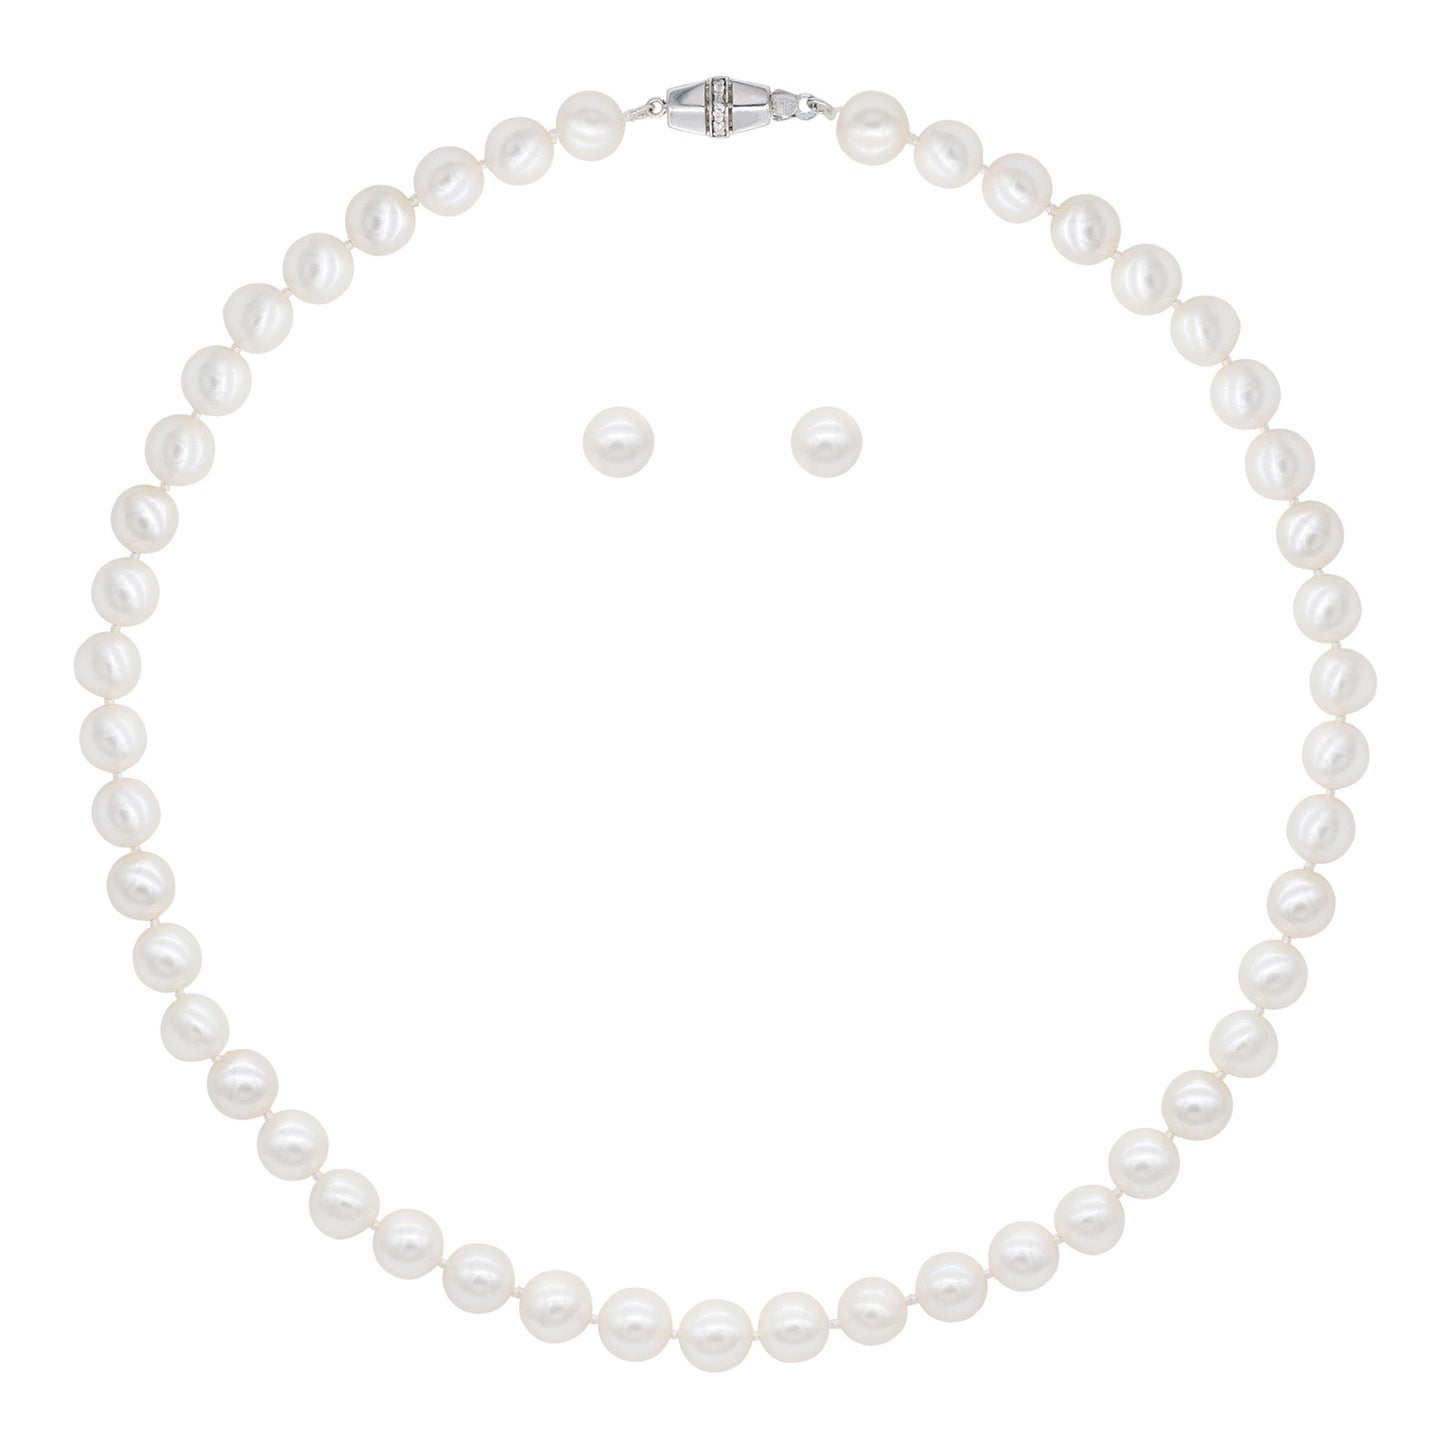 Genuine Freshwater Pearl Strand Necklace with Pearl Stud Earrings - 18 in Long